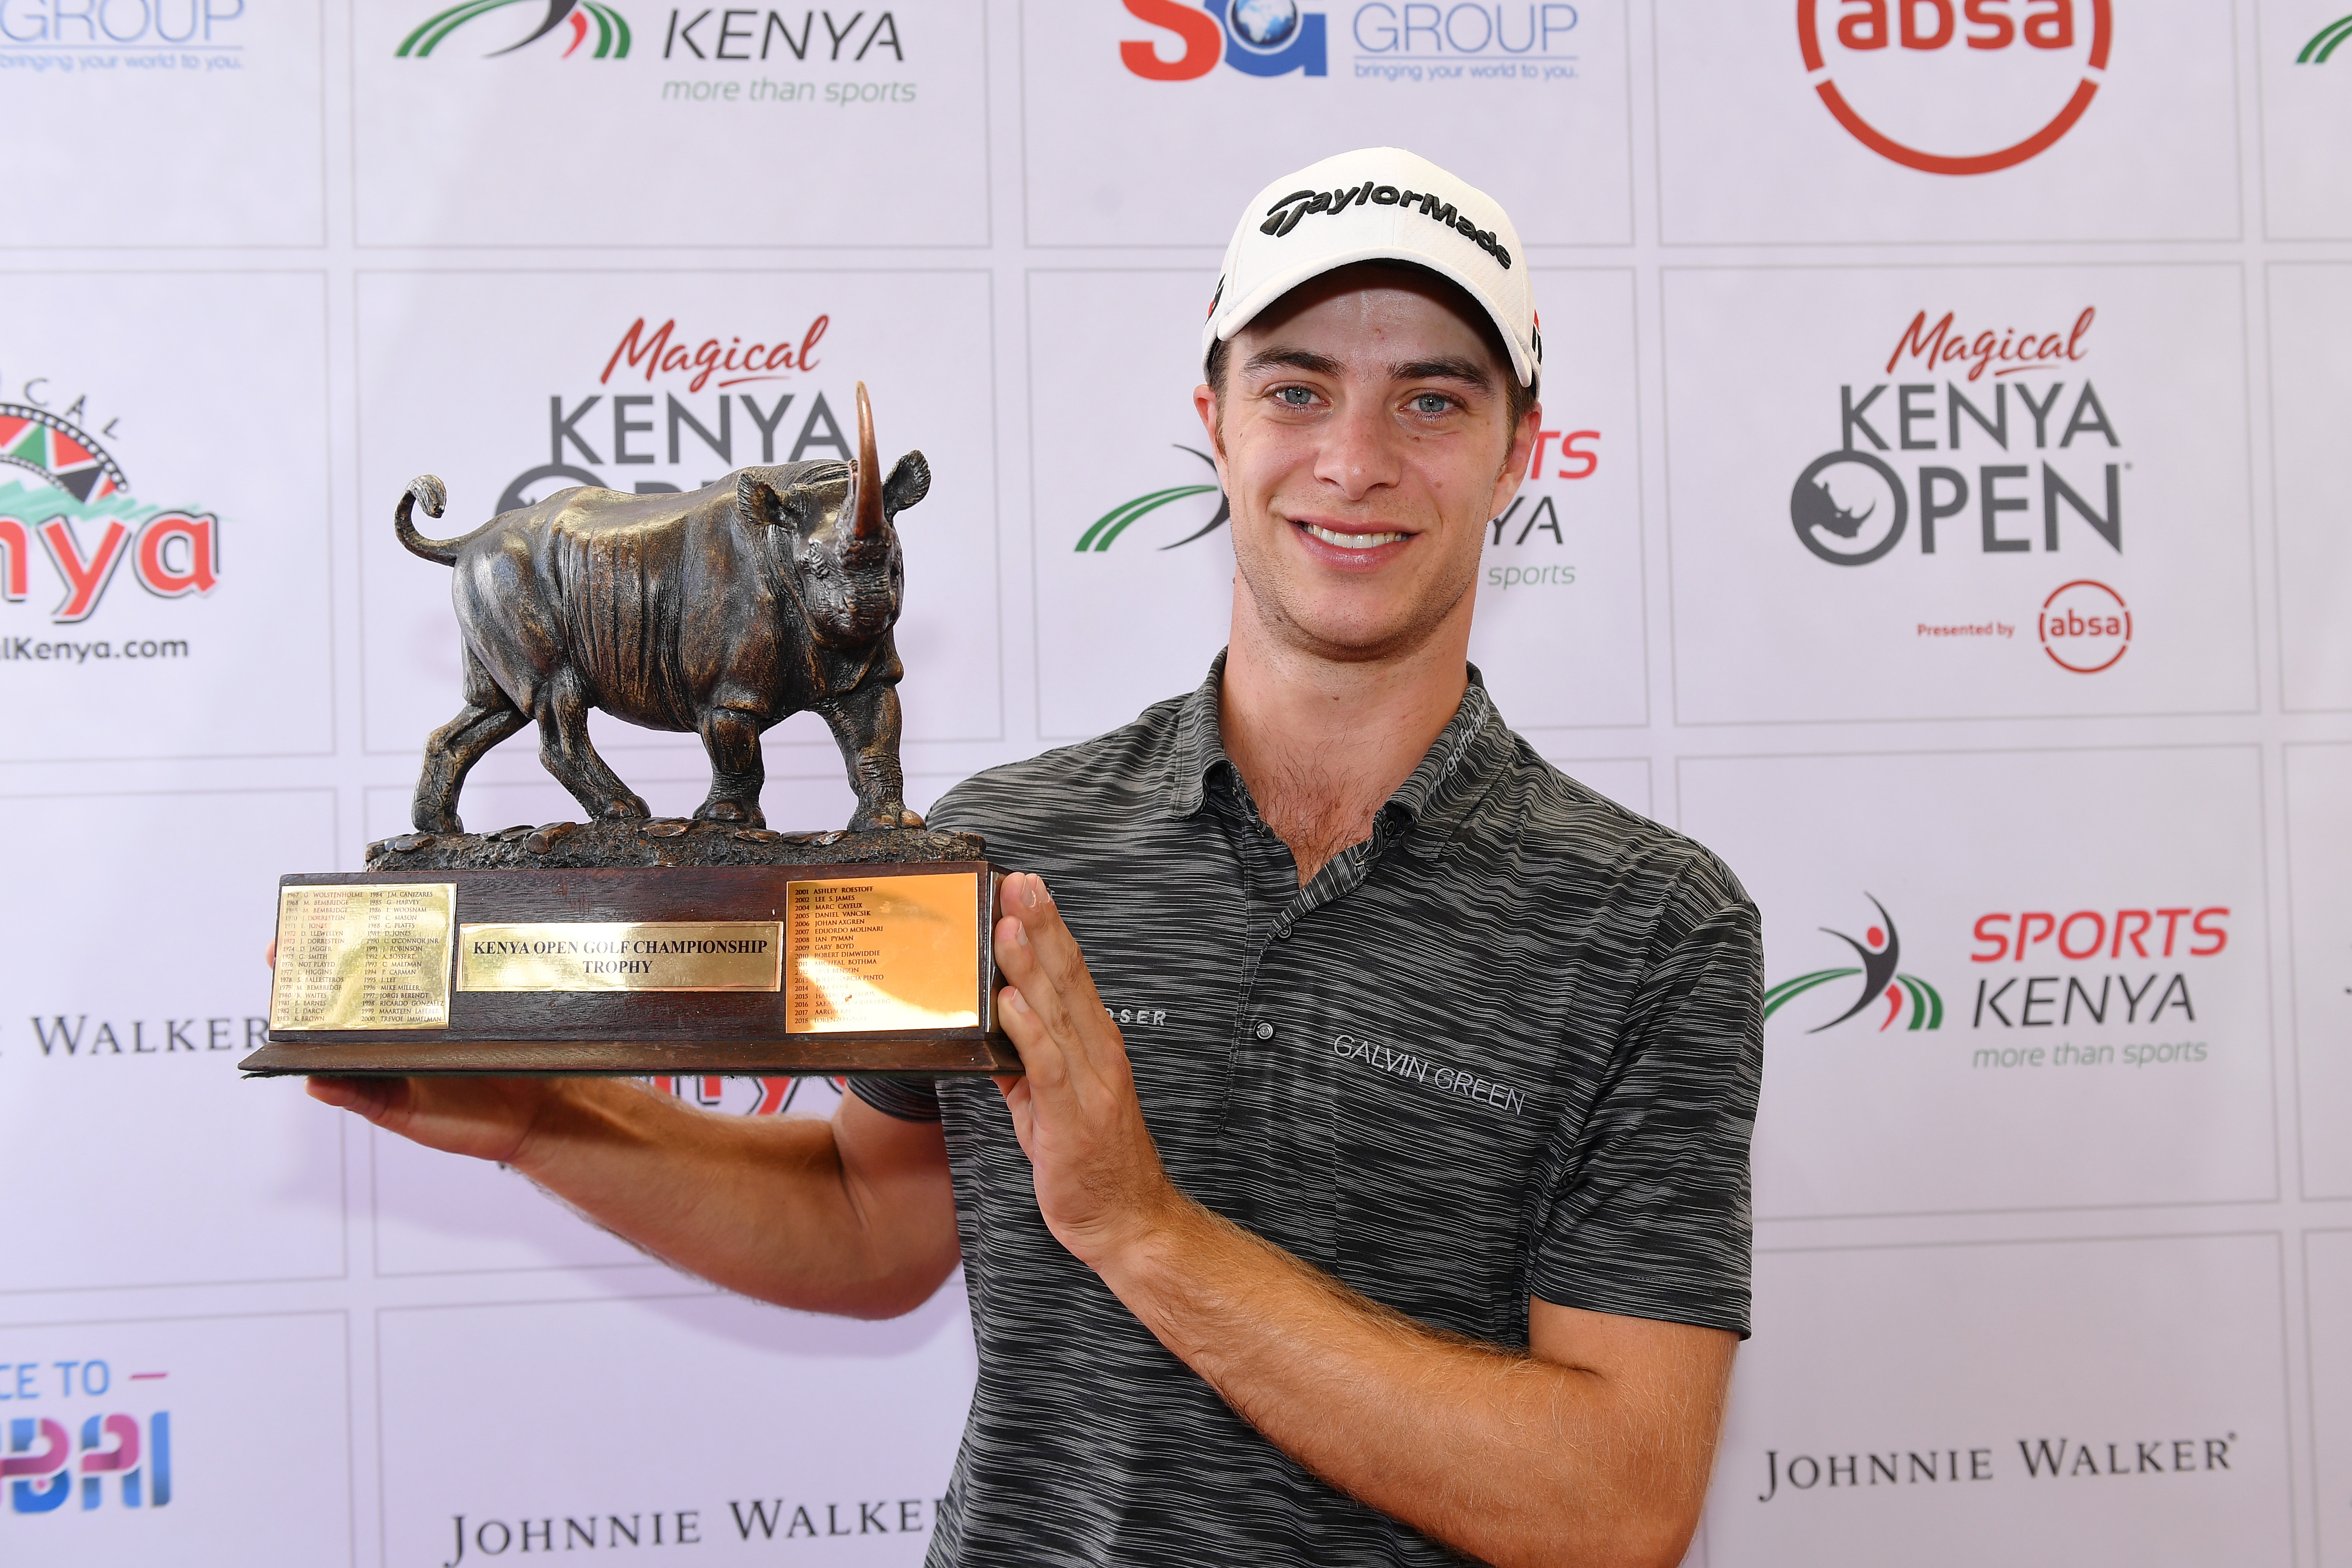 Kenya Open - Day Four Getty Images